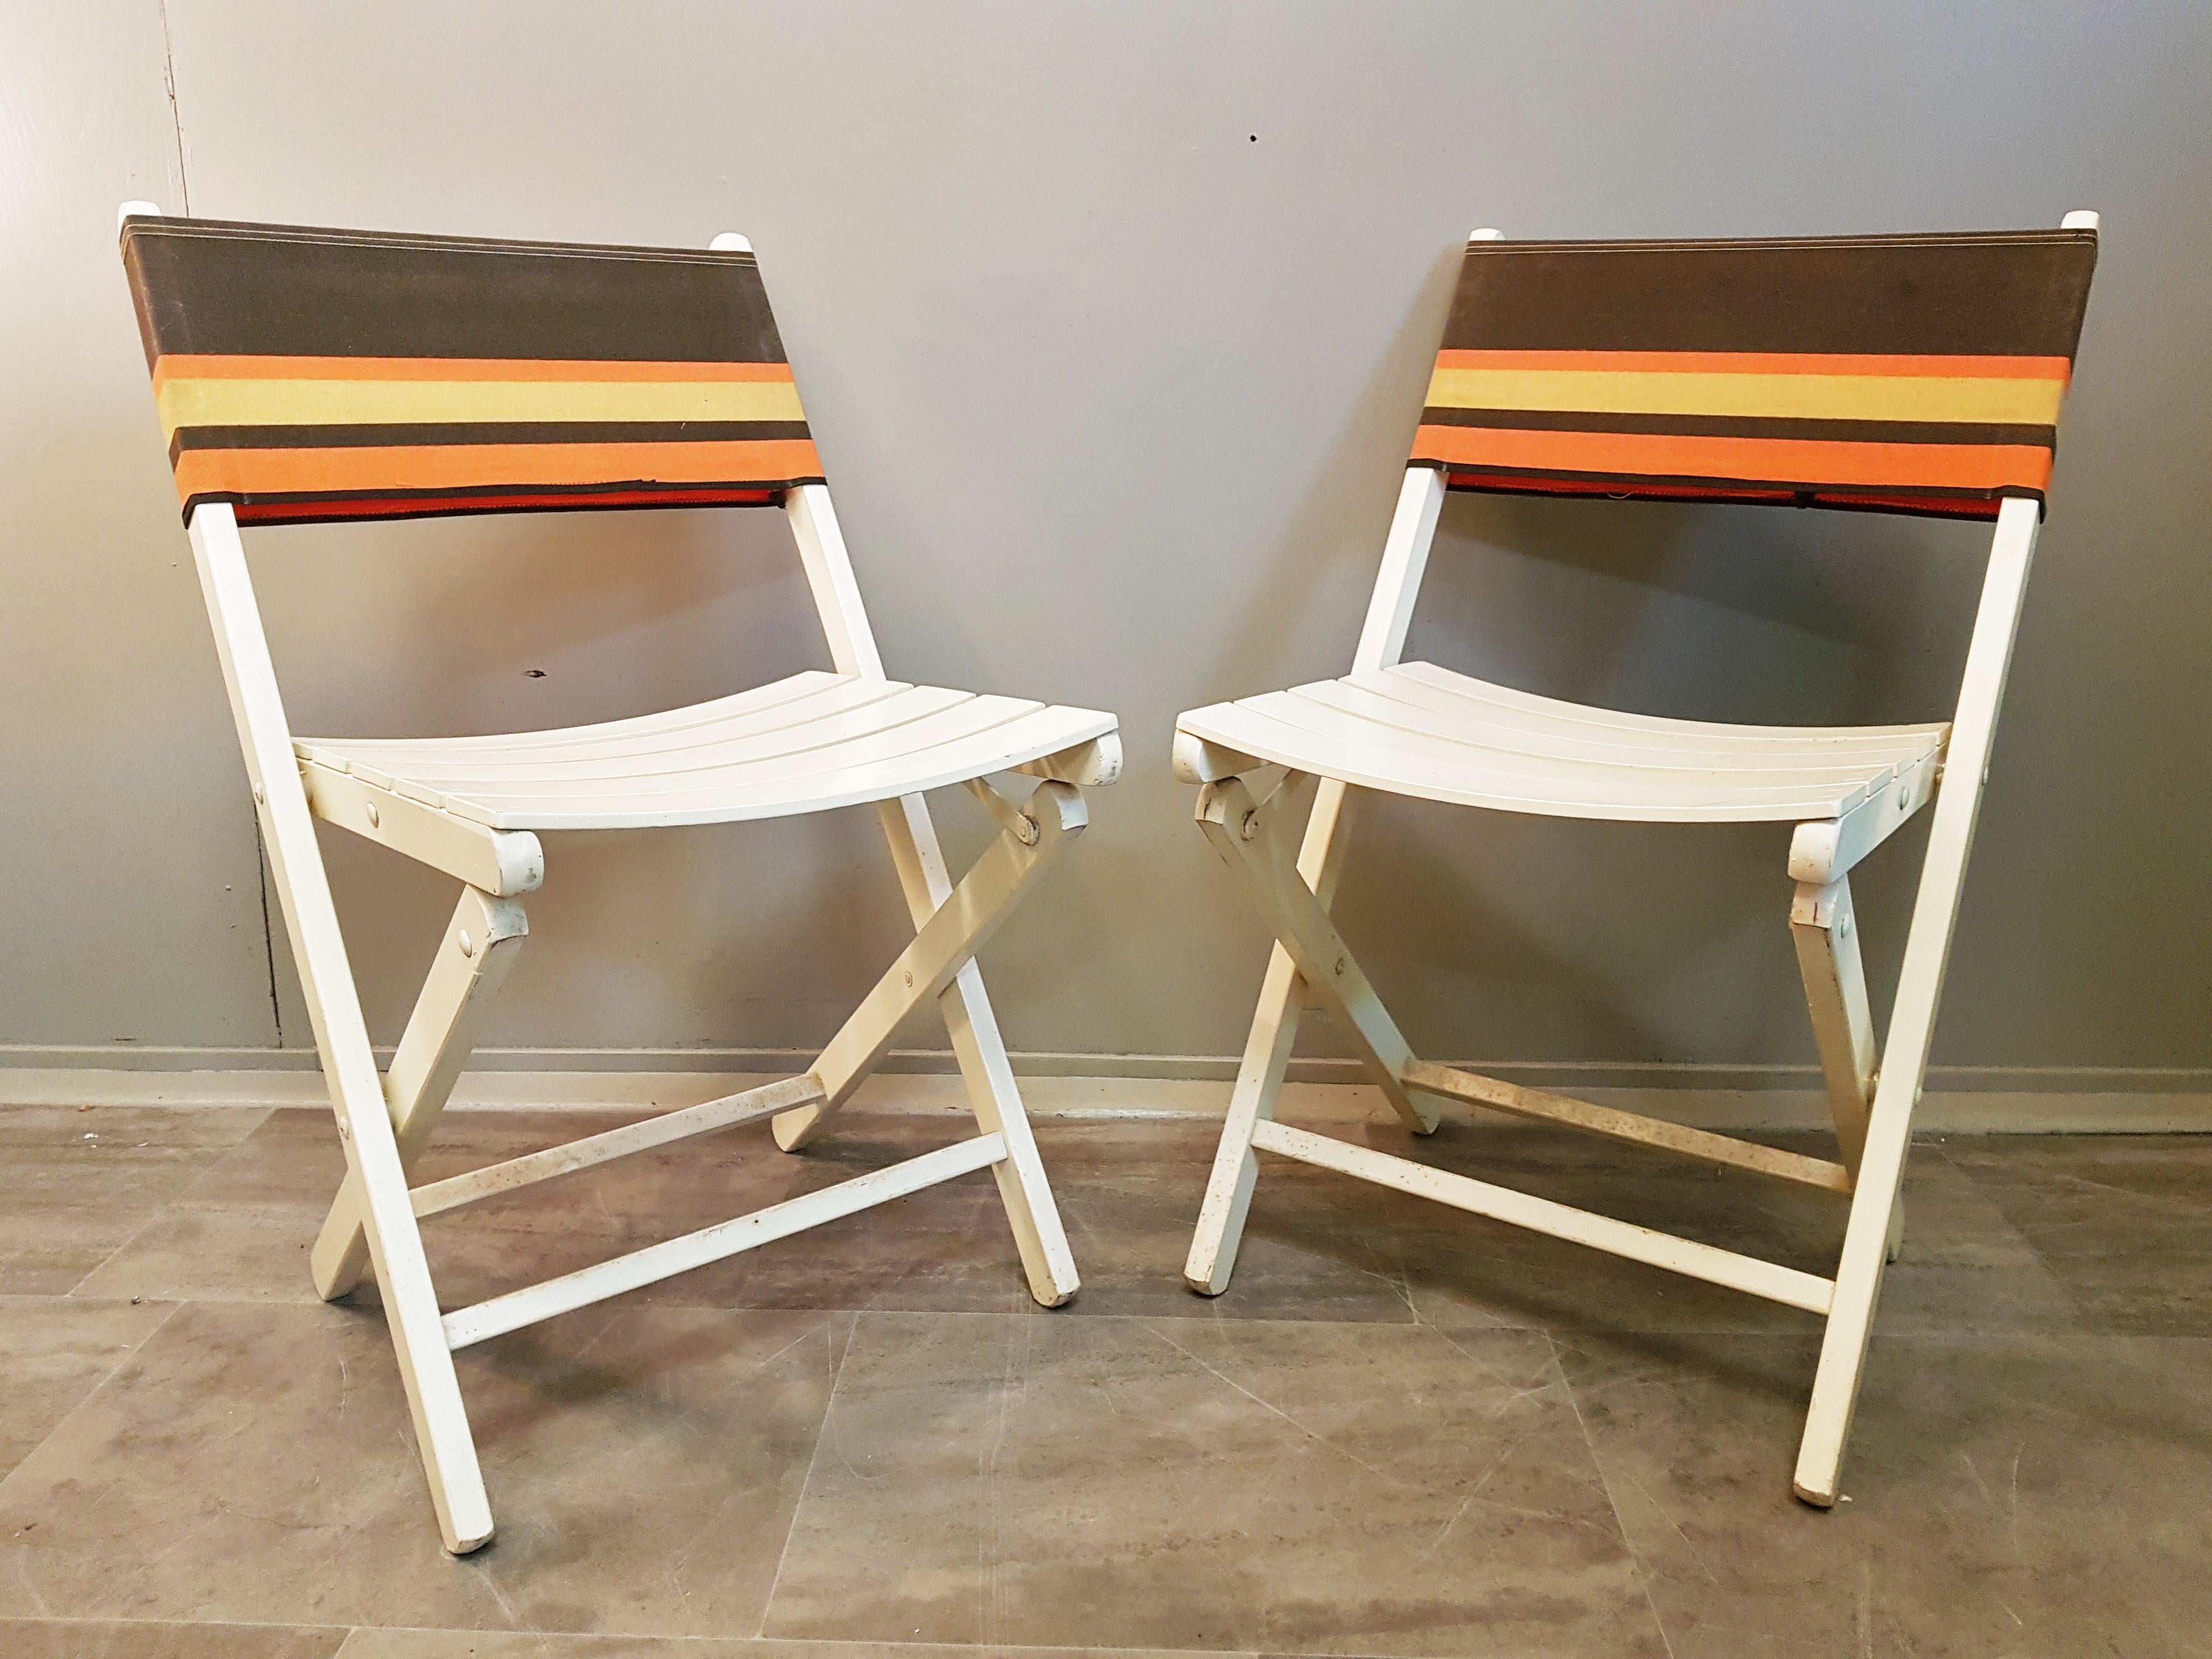 Boho Chic Set of 6 Midcentury Folding Chairs, France, 1960s For Sale 5